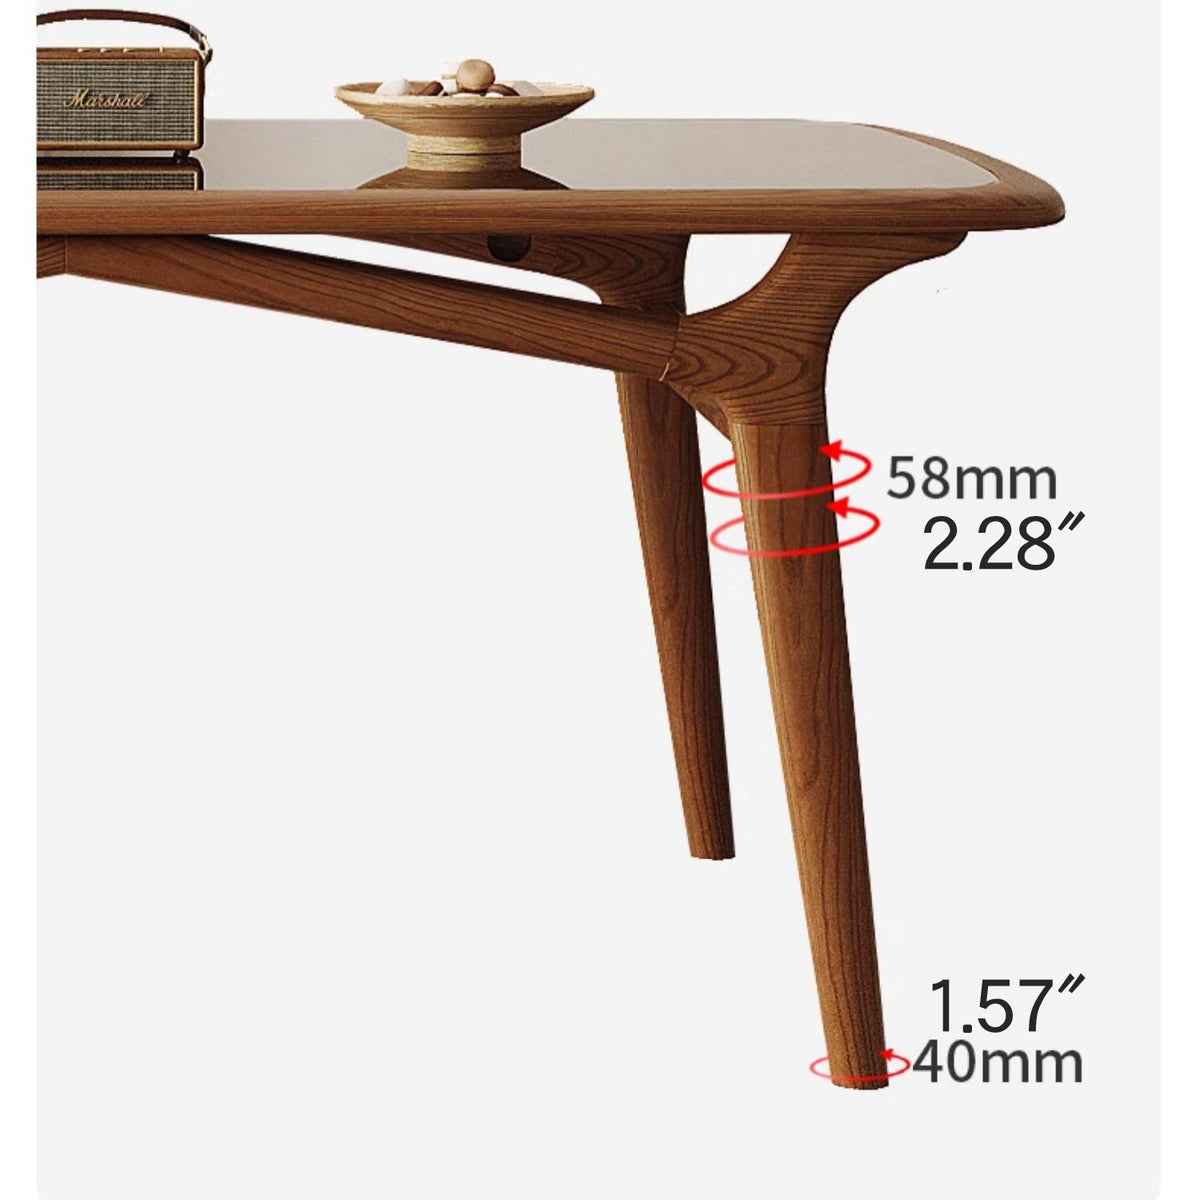 Premium Handmade Natural Ash Wood Dining Table - Brown Finish fmbs-014